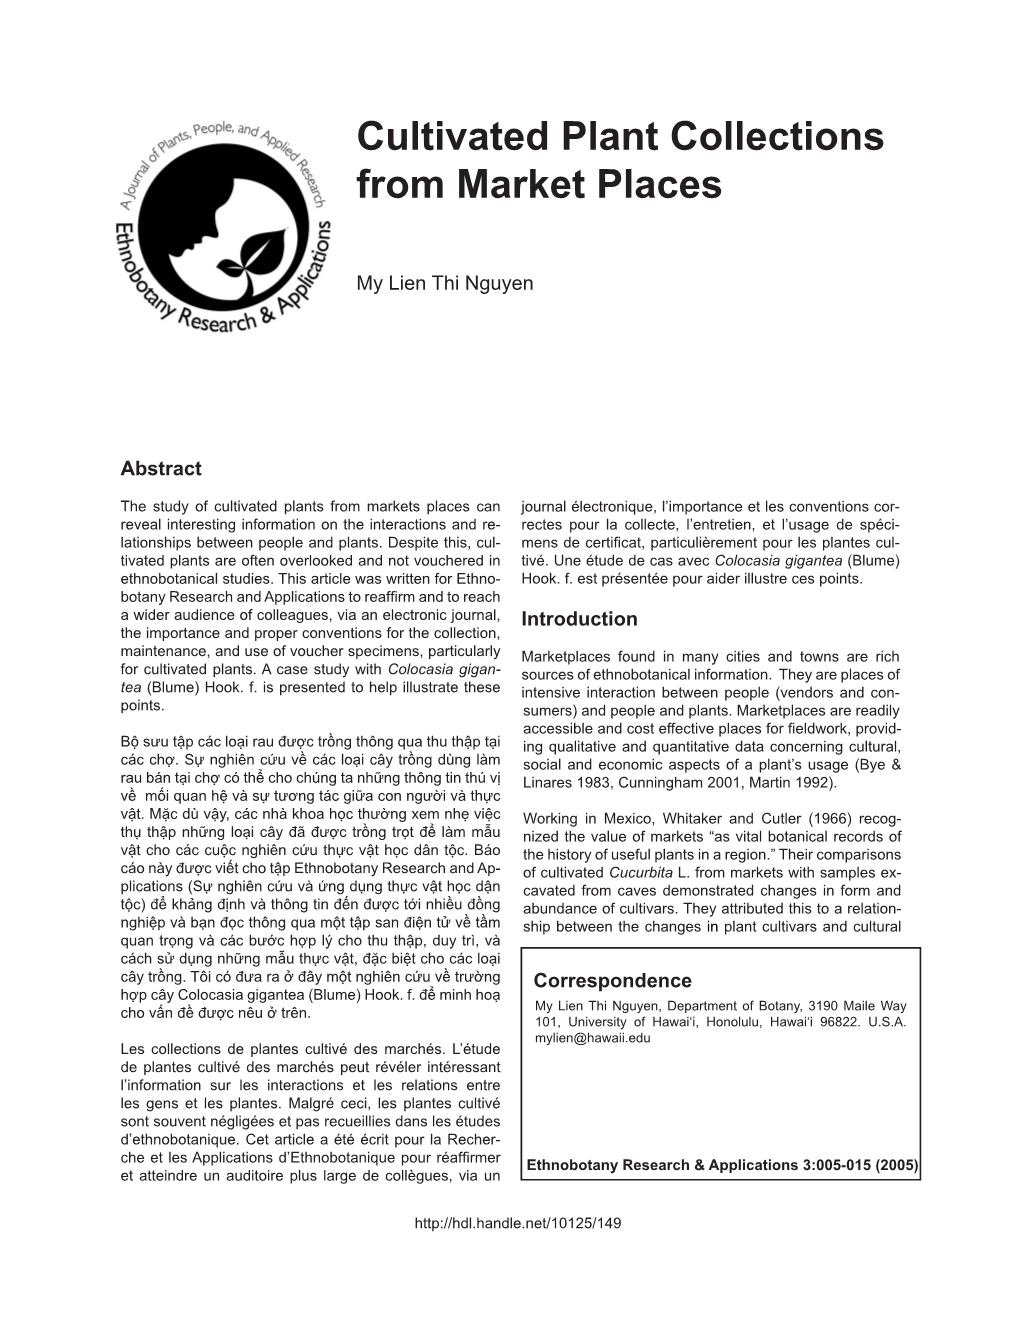 Cultivated Plant Collections from Market Places